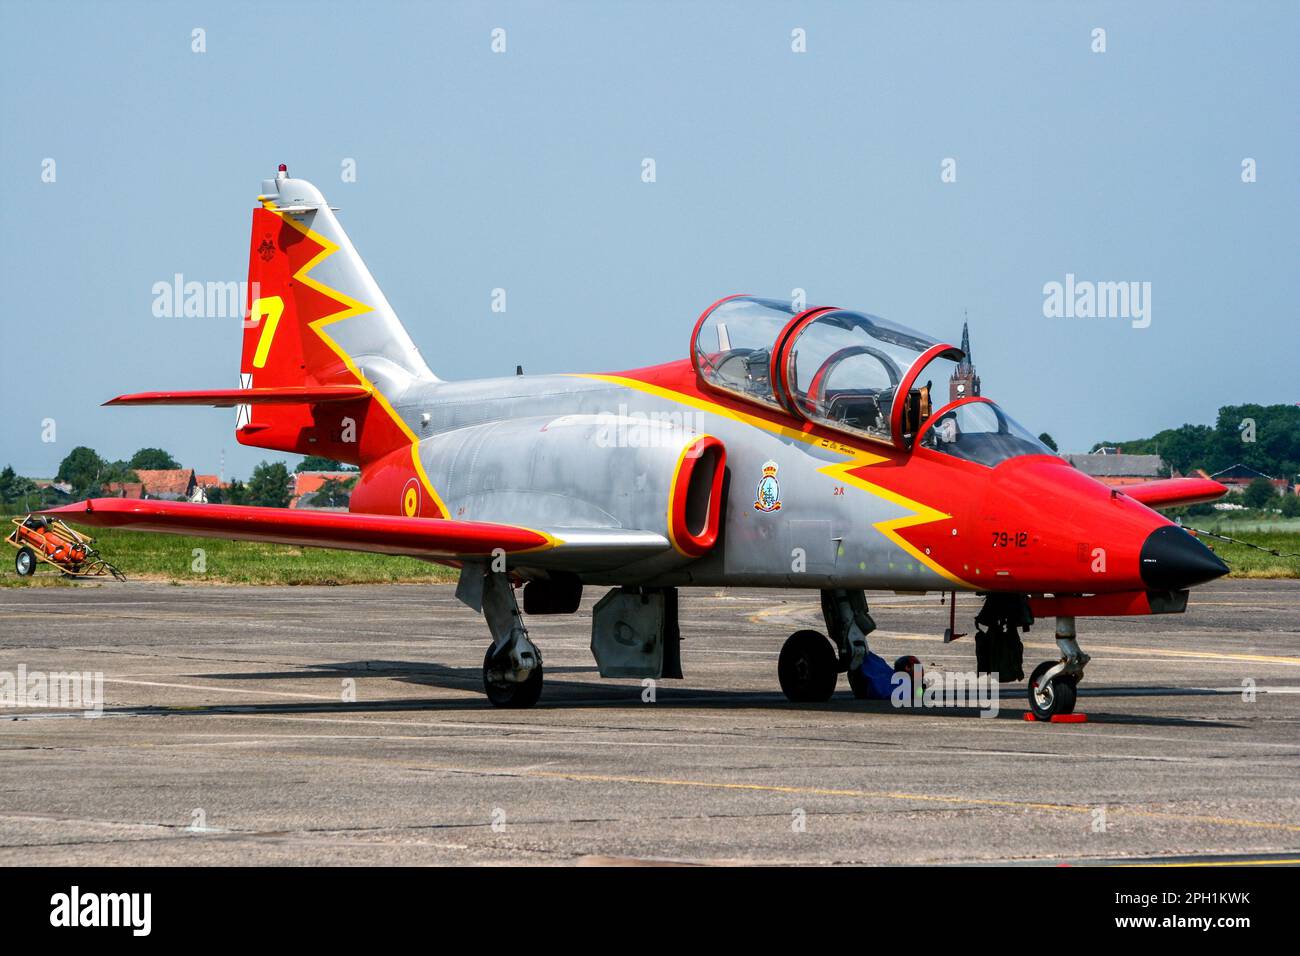 Spanish Air Force Casa C-101 Aviojet advanced trainer and light attack aircraft on the tarmac of Cambrai Air Base. Cambra, France - June 26, 2010 Stock Photo